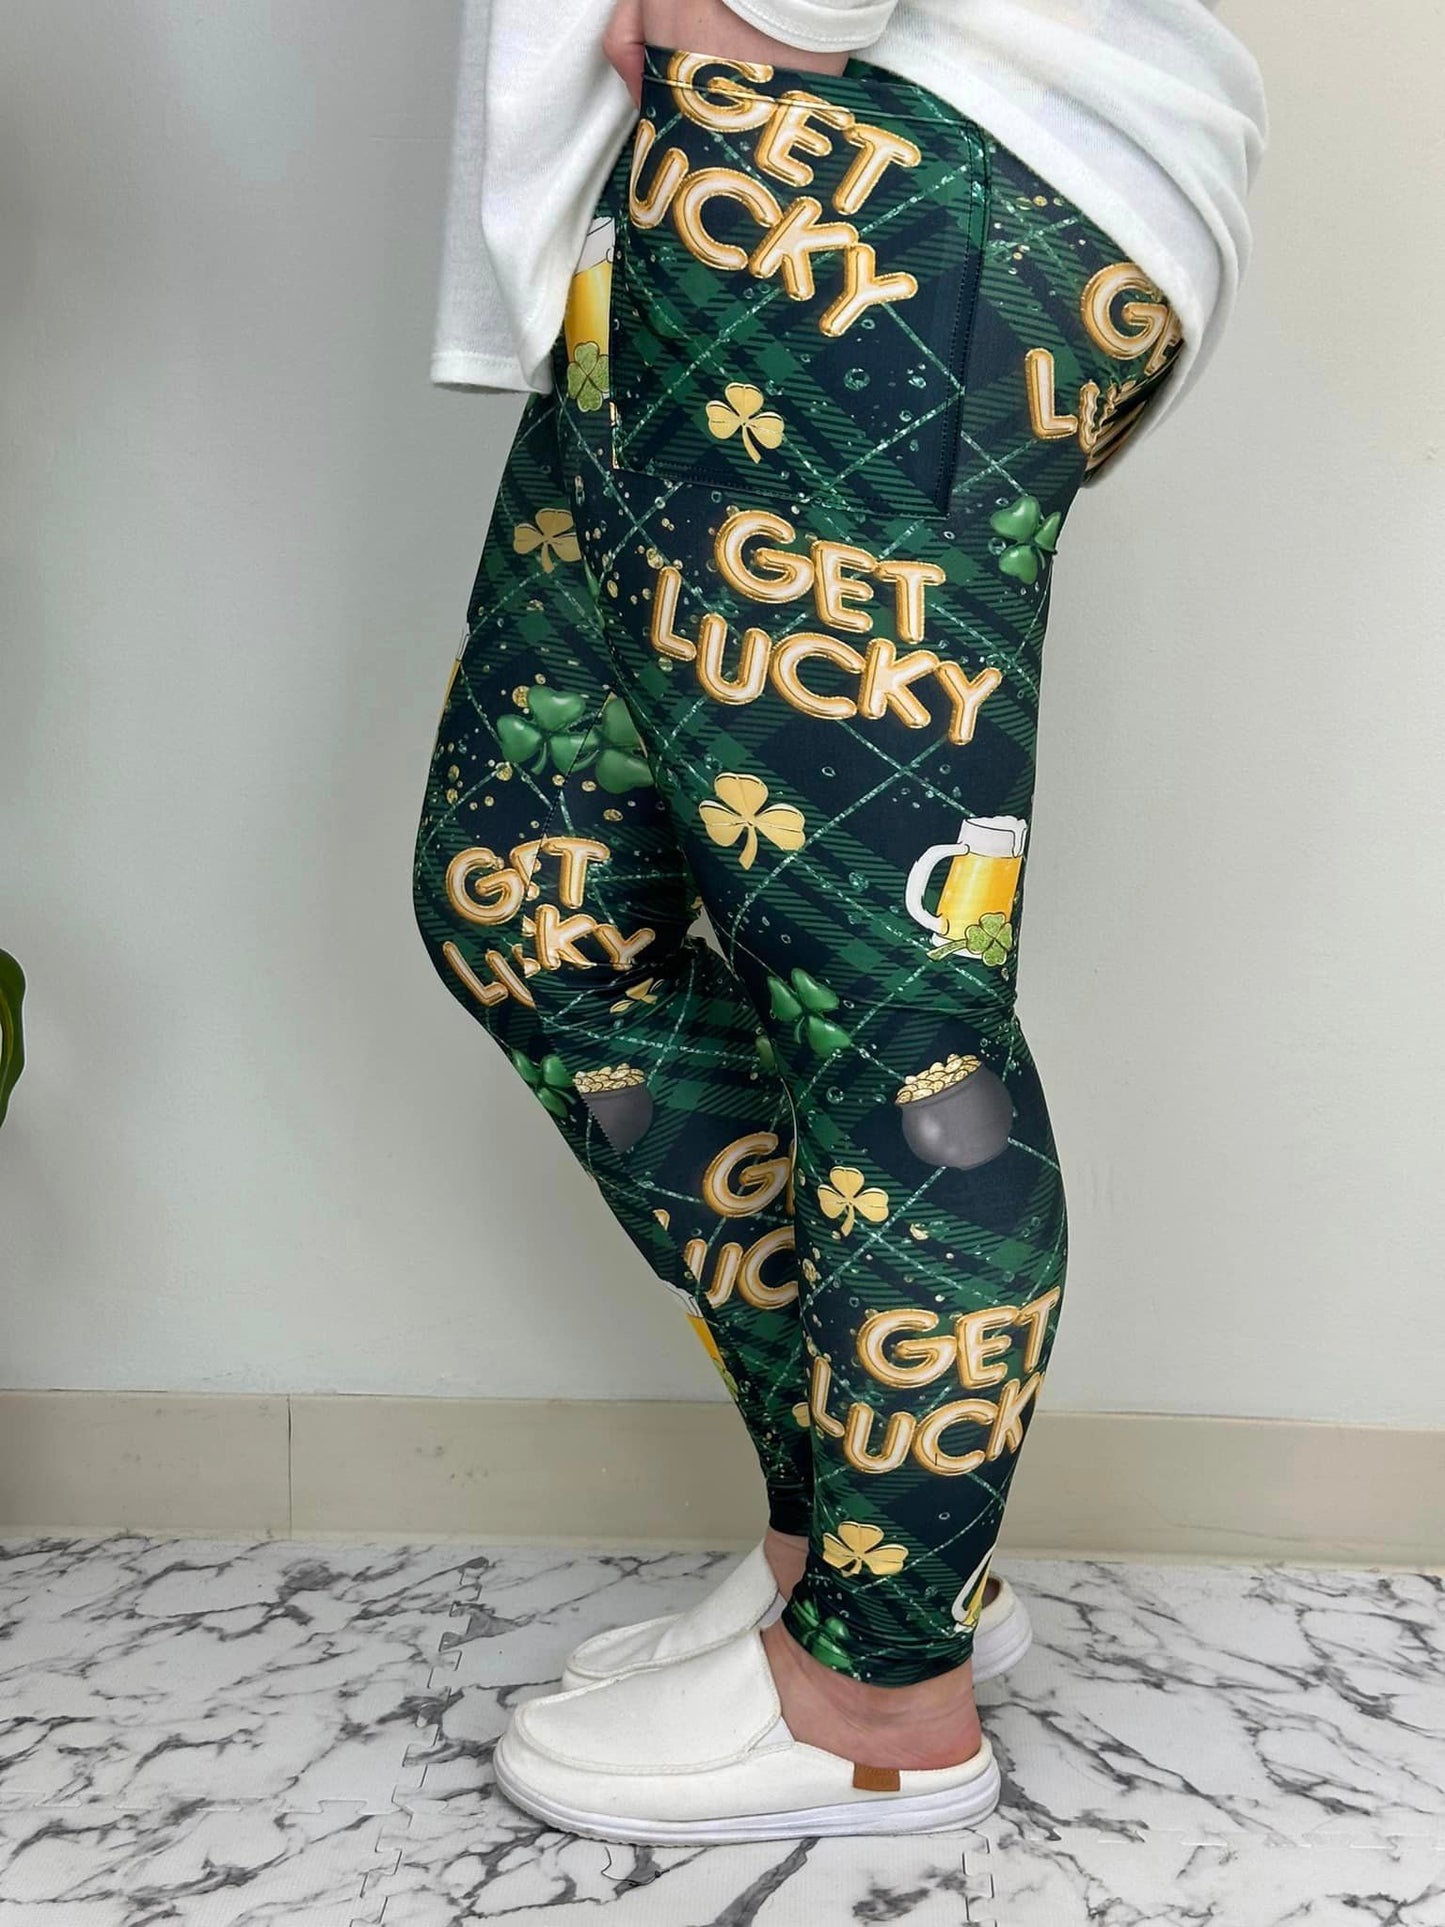 Get Lucky Leggings w/ Pockets - Three Bears Boutique